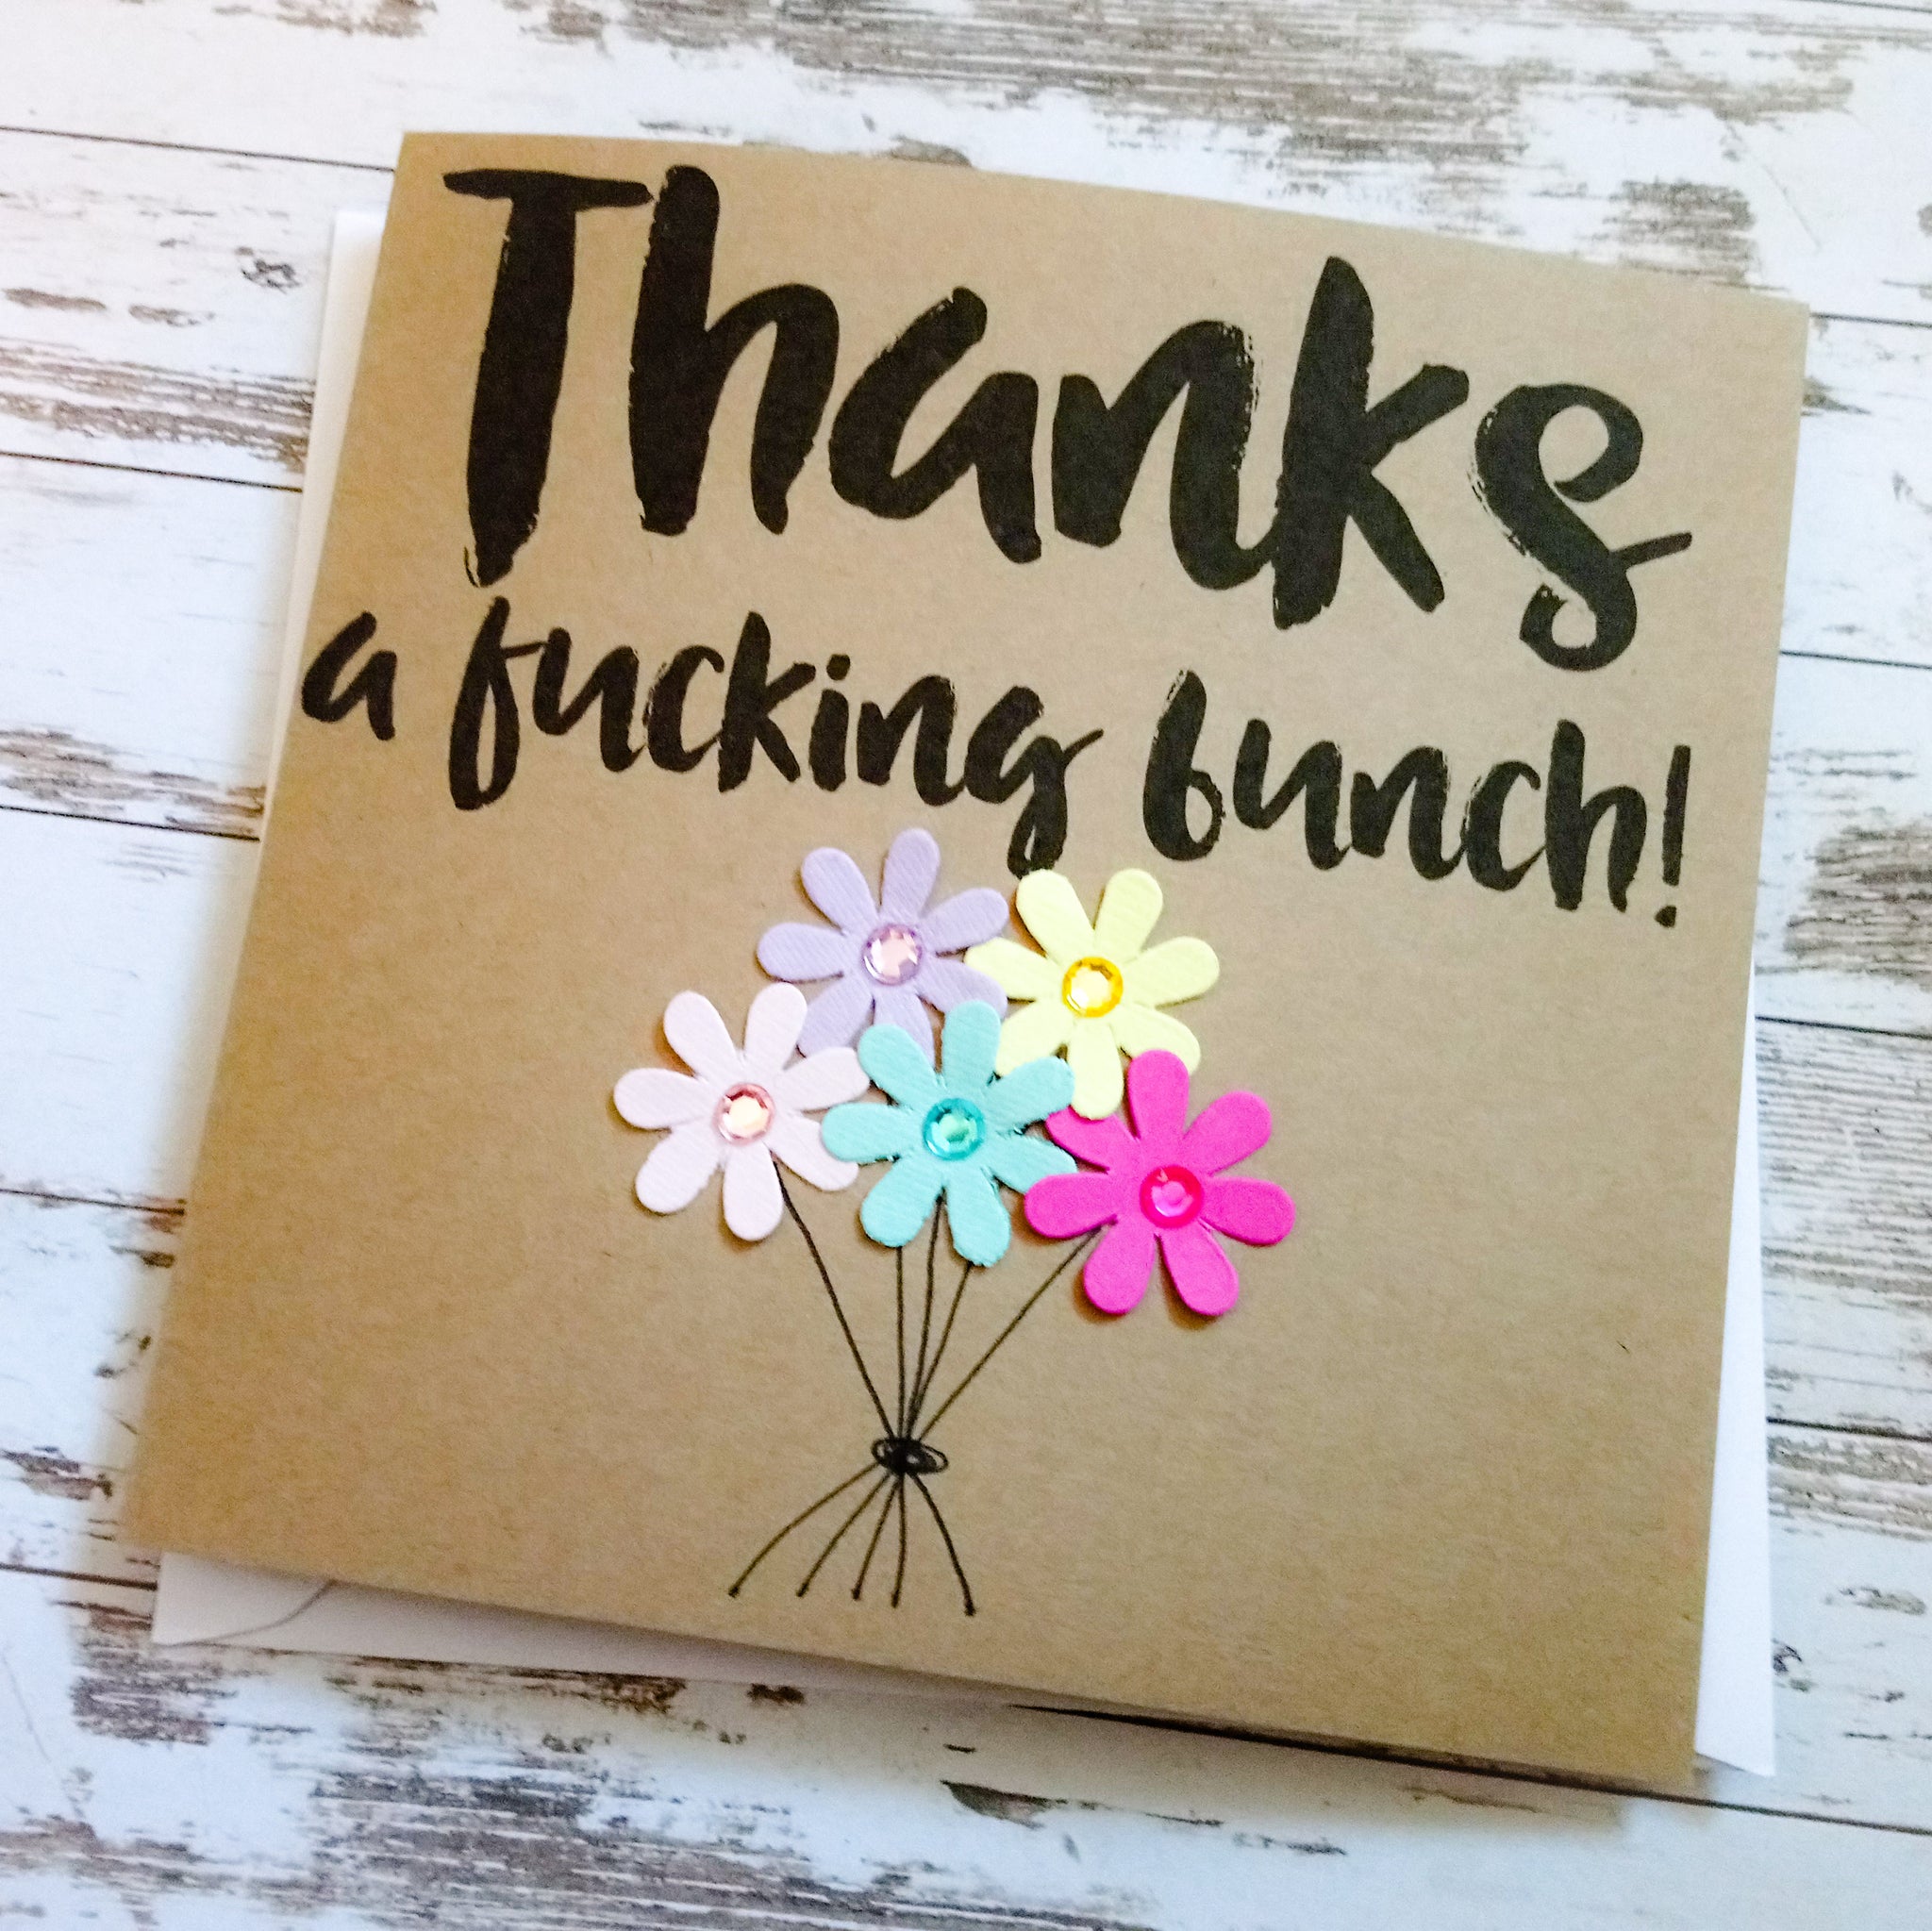 Handmade funny rude 'Thanks a fucking bunch' thank you card